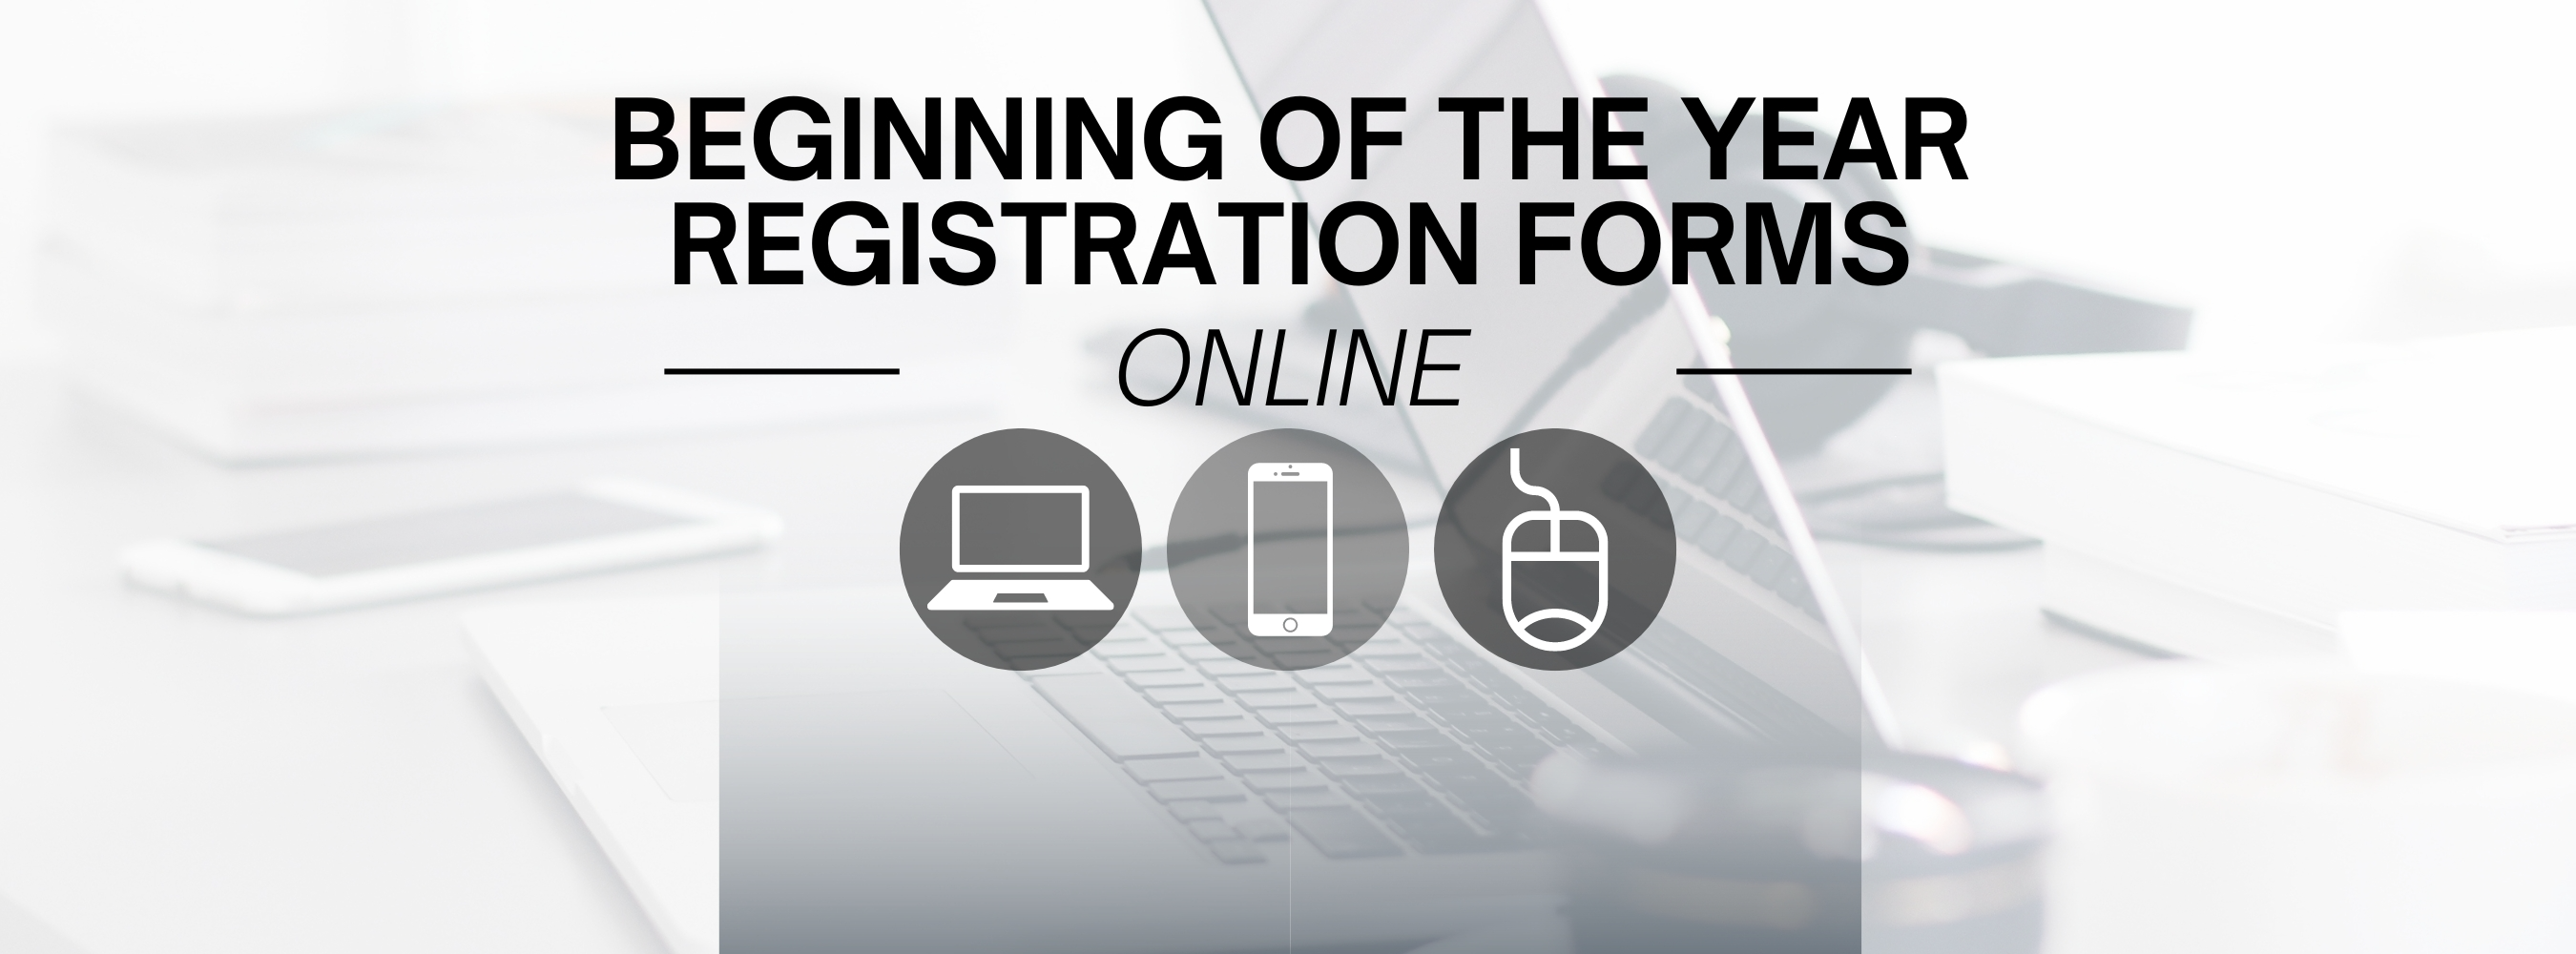 Beginning of Year forms online